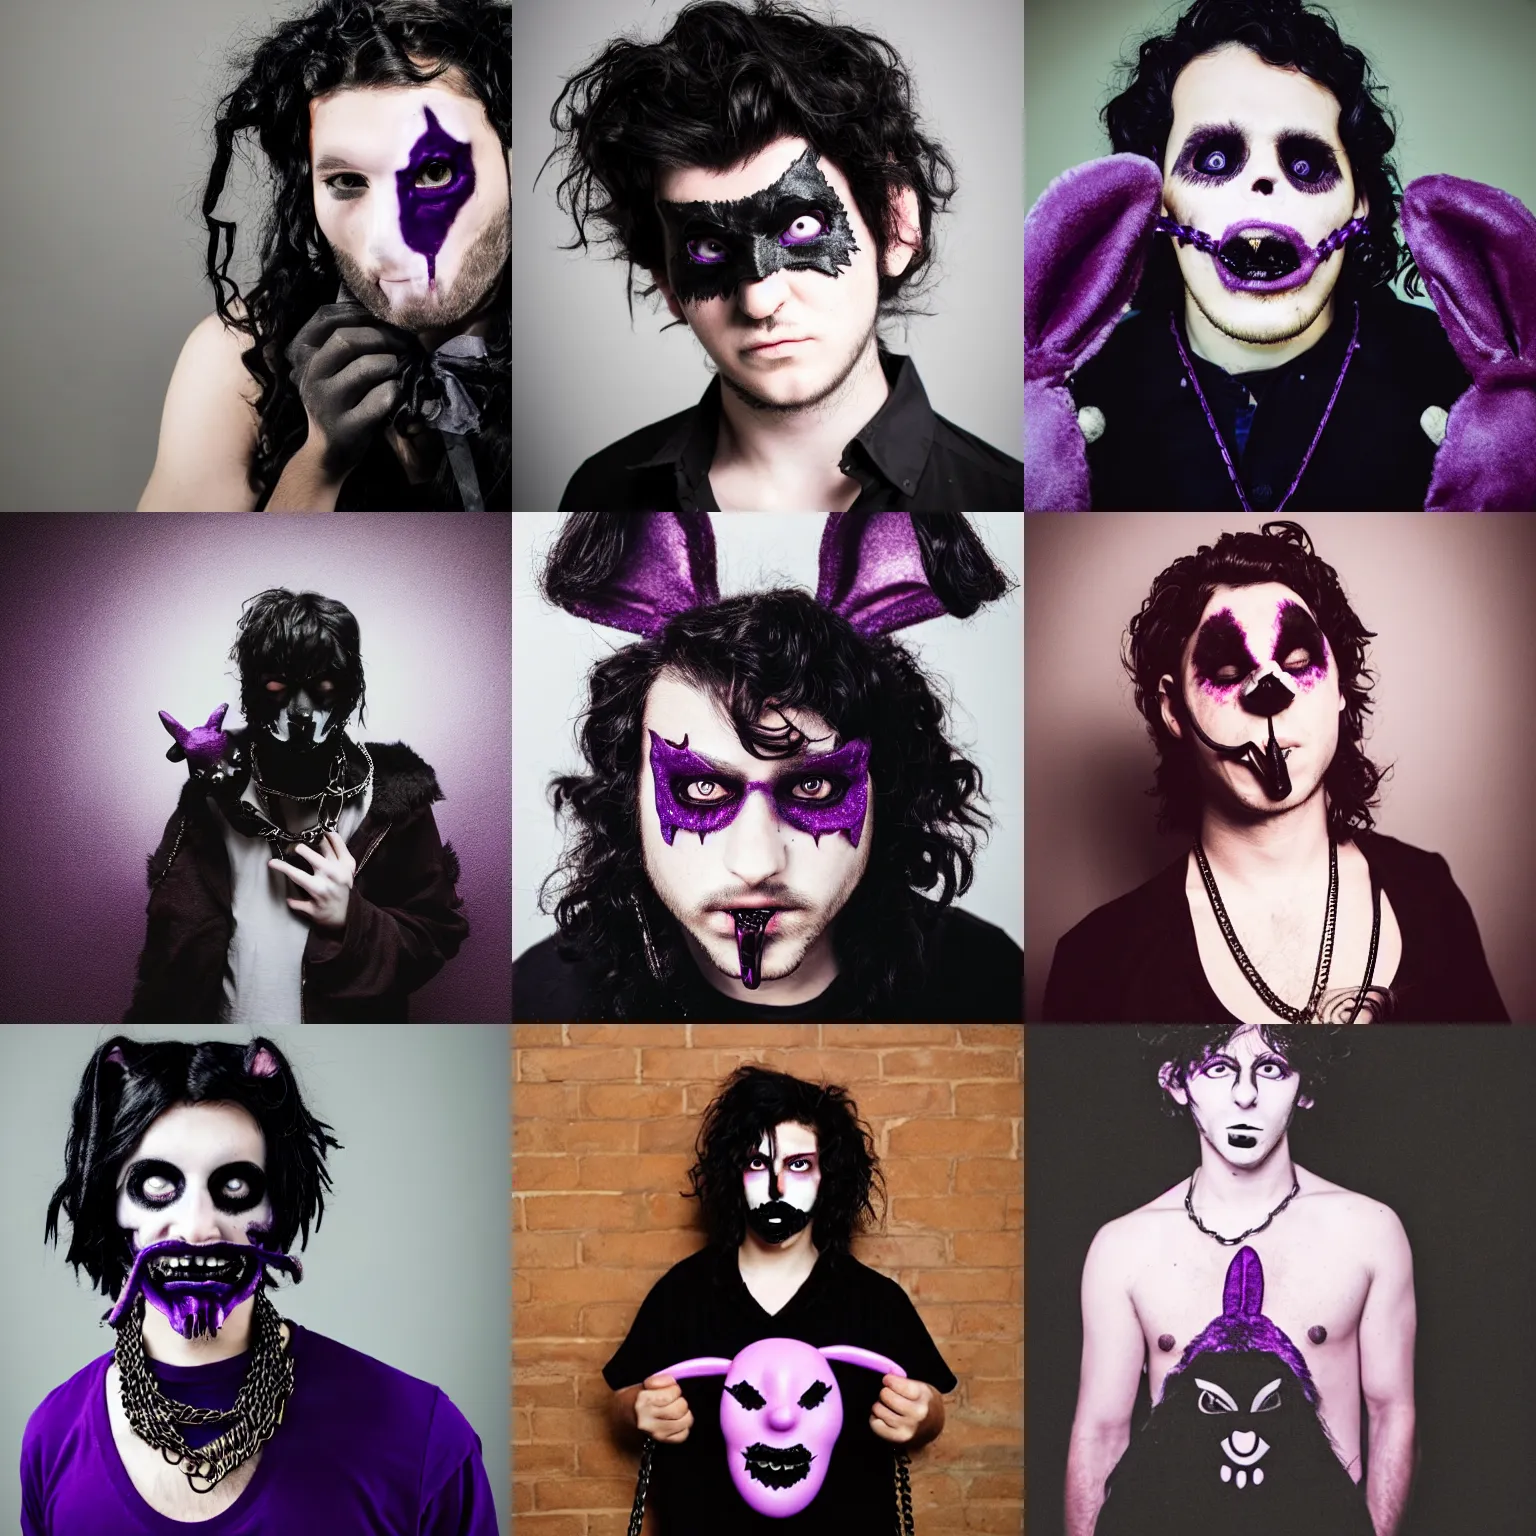 Prompt: Photo of a young mysterious man with curly dark hair wearing black clothes and emo chains, holding a purple, demonic and broken in half bunny mask that only covers the right eye and mouth in front of his face, film photography